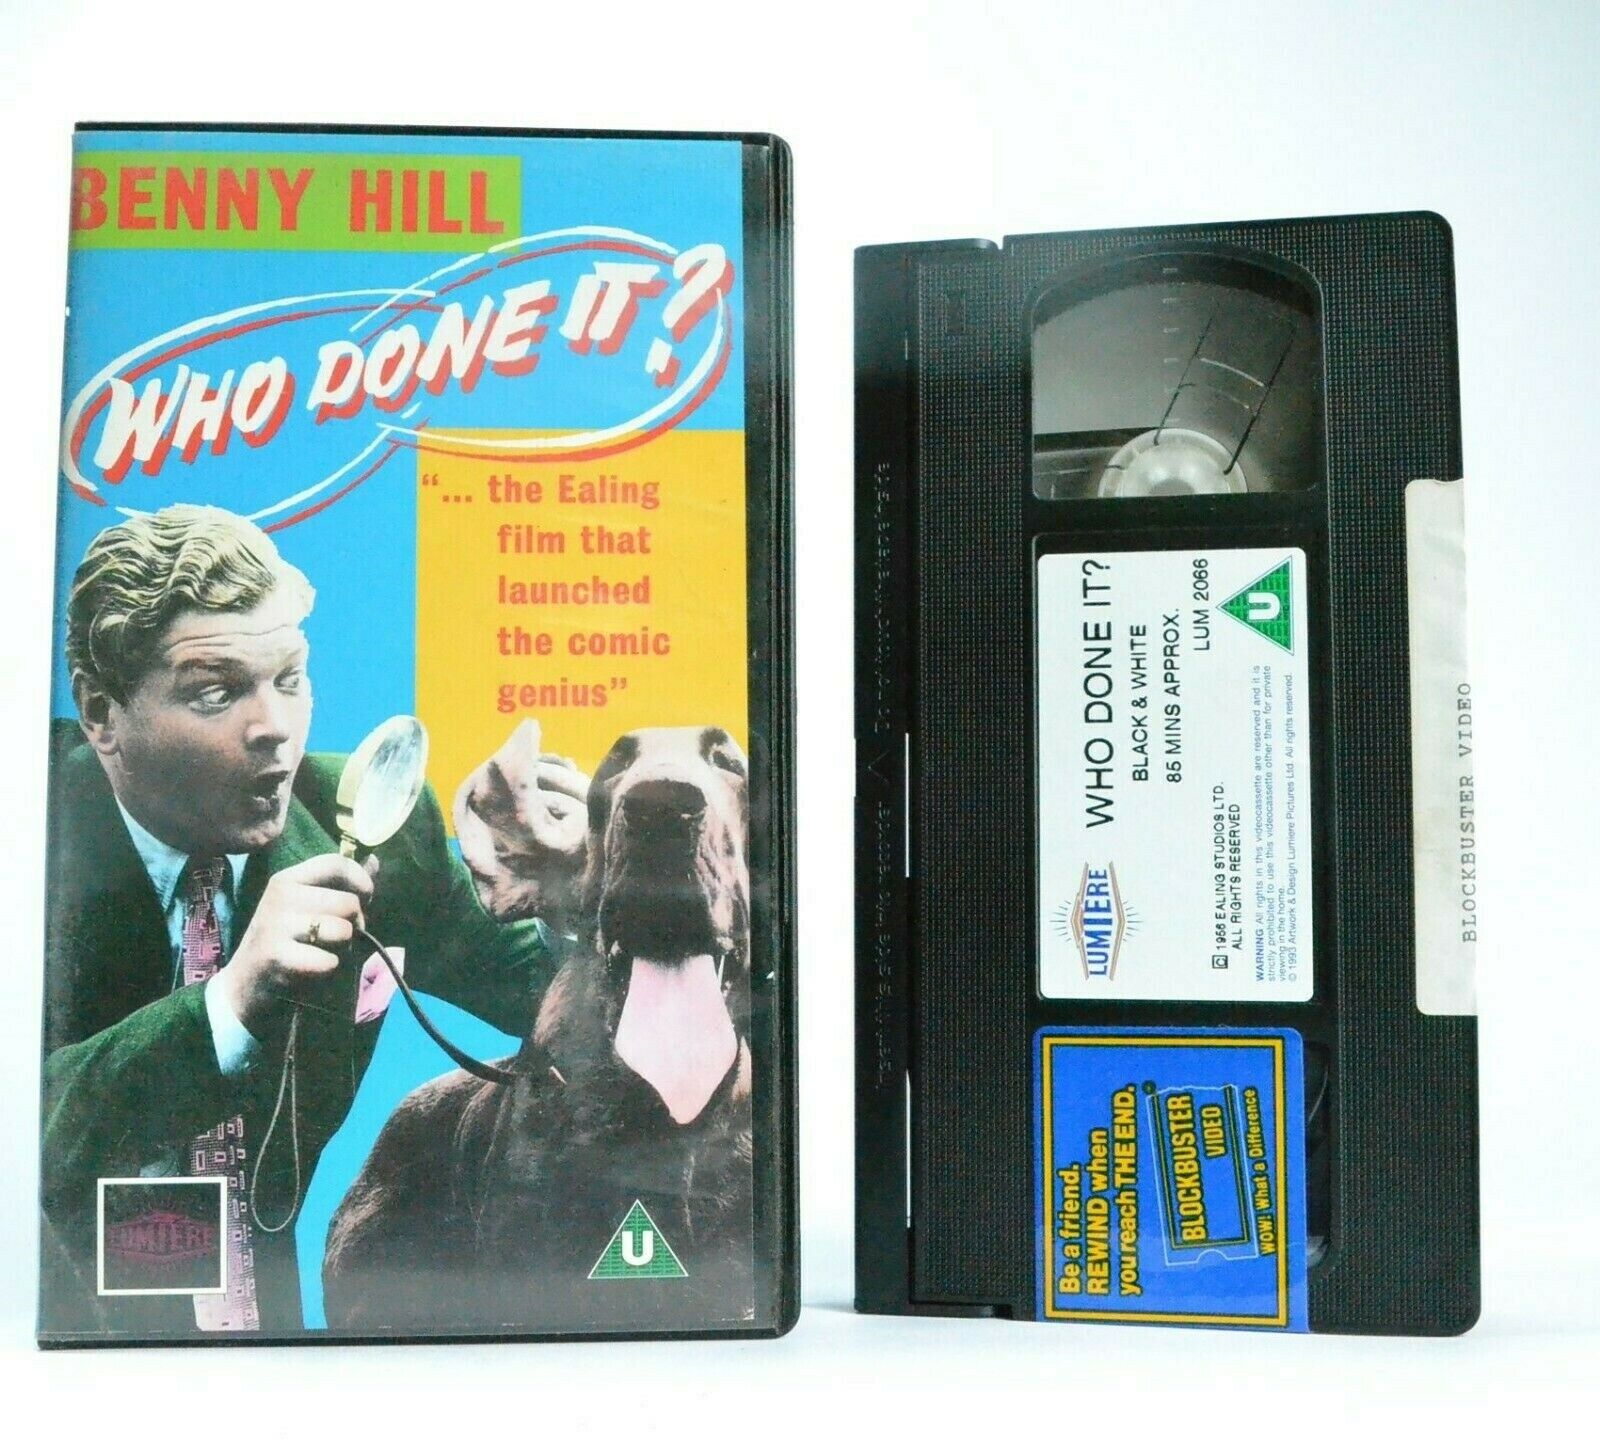 Benny Hill: Who Done It? (1965) - Comedy Classic - British Comic Genius - VHS-